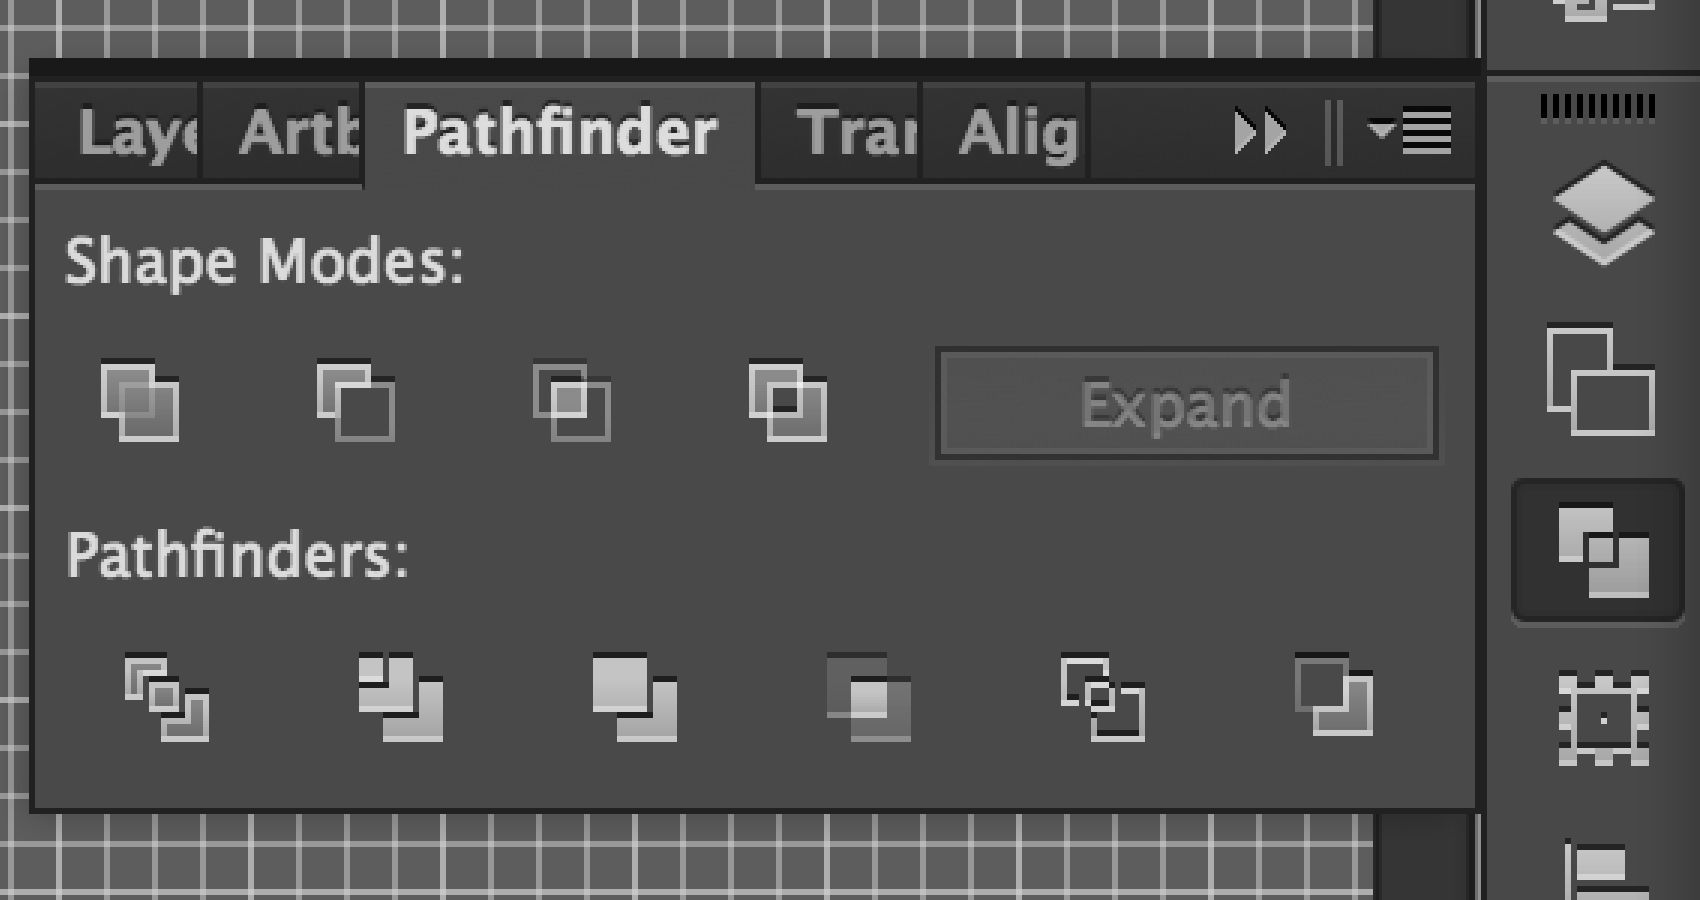 Pathfinder is a great tool for simplifying complex layered icons.